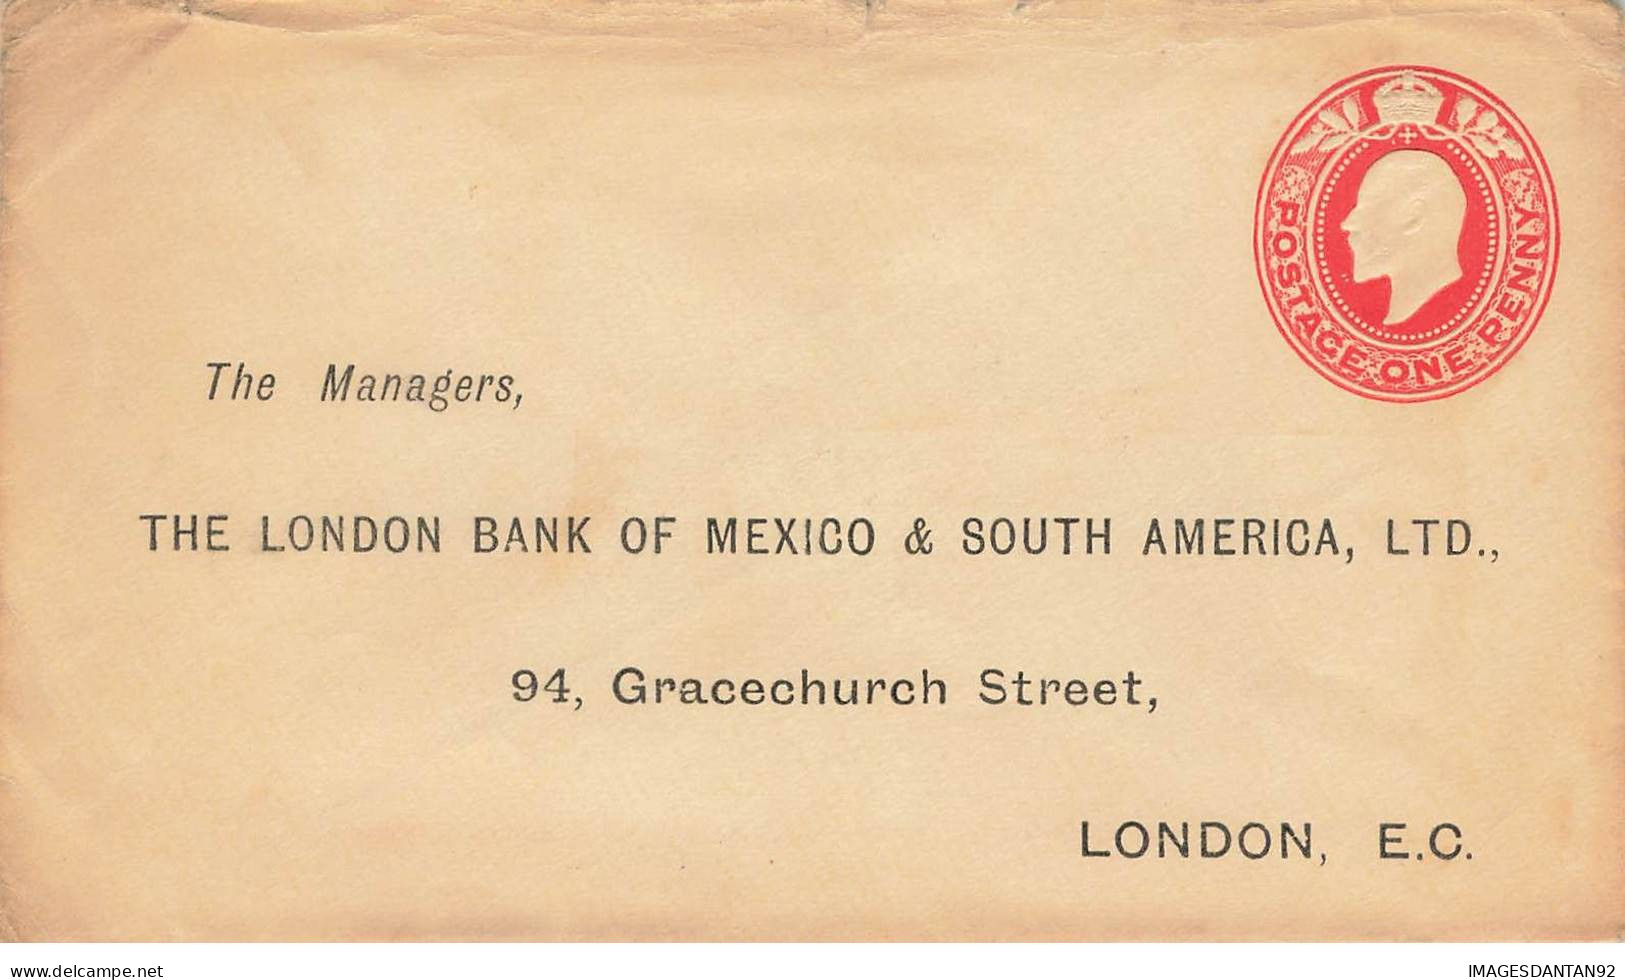 ROYAUME UNI ENGLAND #32806 ENTIER REPIQUAGE THE LONDON BANK OF MEXICO AND SOUTH AMERICA - Entiers Postaux